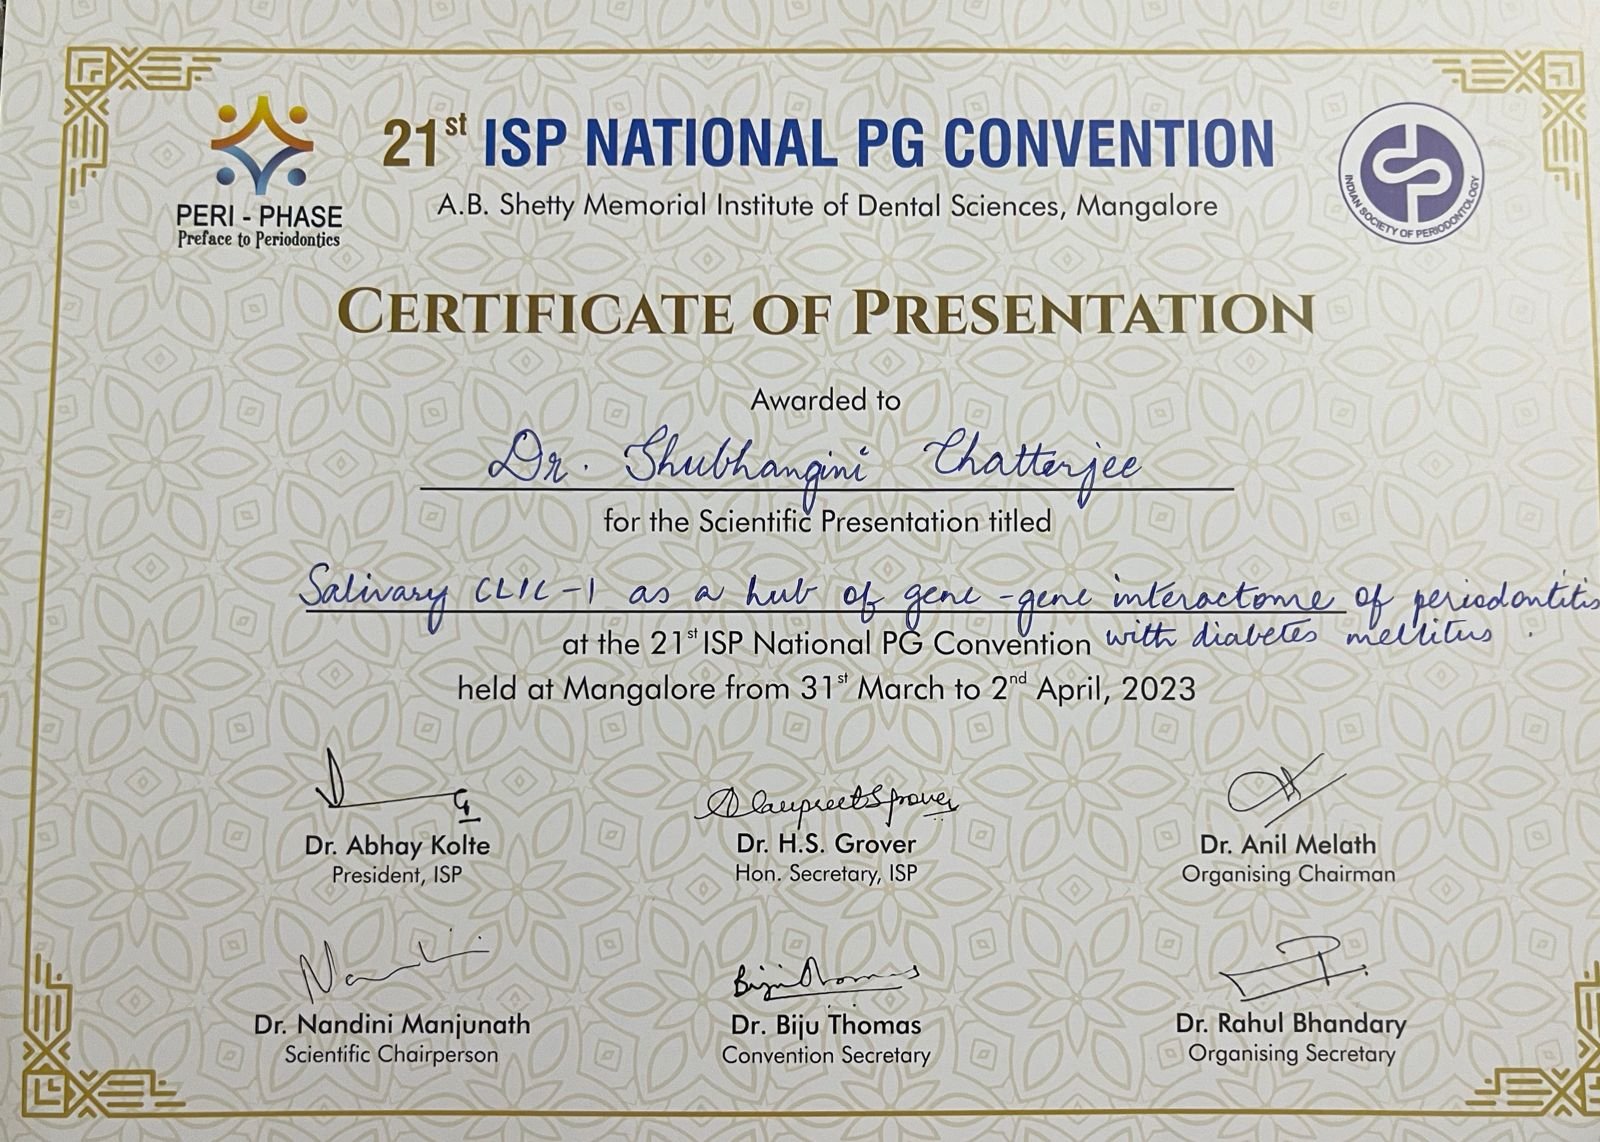 Dr Devika received Commendation Prize in Preventive Category.